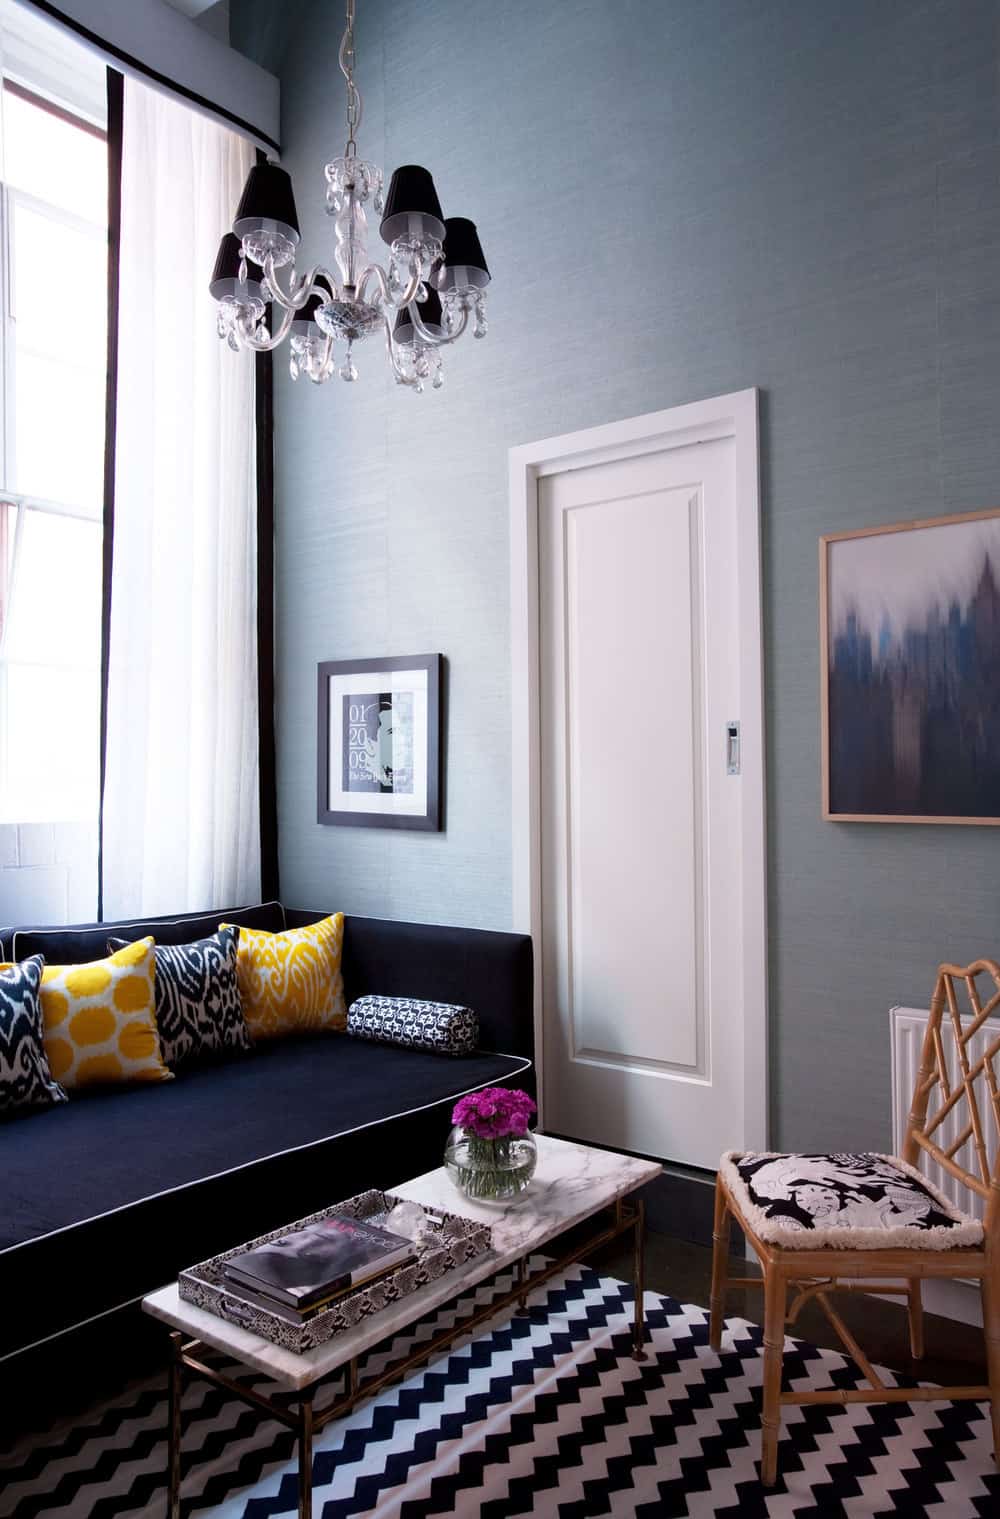 nook-living-room-navy-daybed-faux-bamboo-occasional-chair-yellow-and-blue-print-cushions-light-teal-grasscloth-wallpaper-black-white-window-dressing-zigzag-rug-diane-bergeron